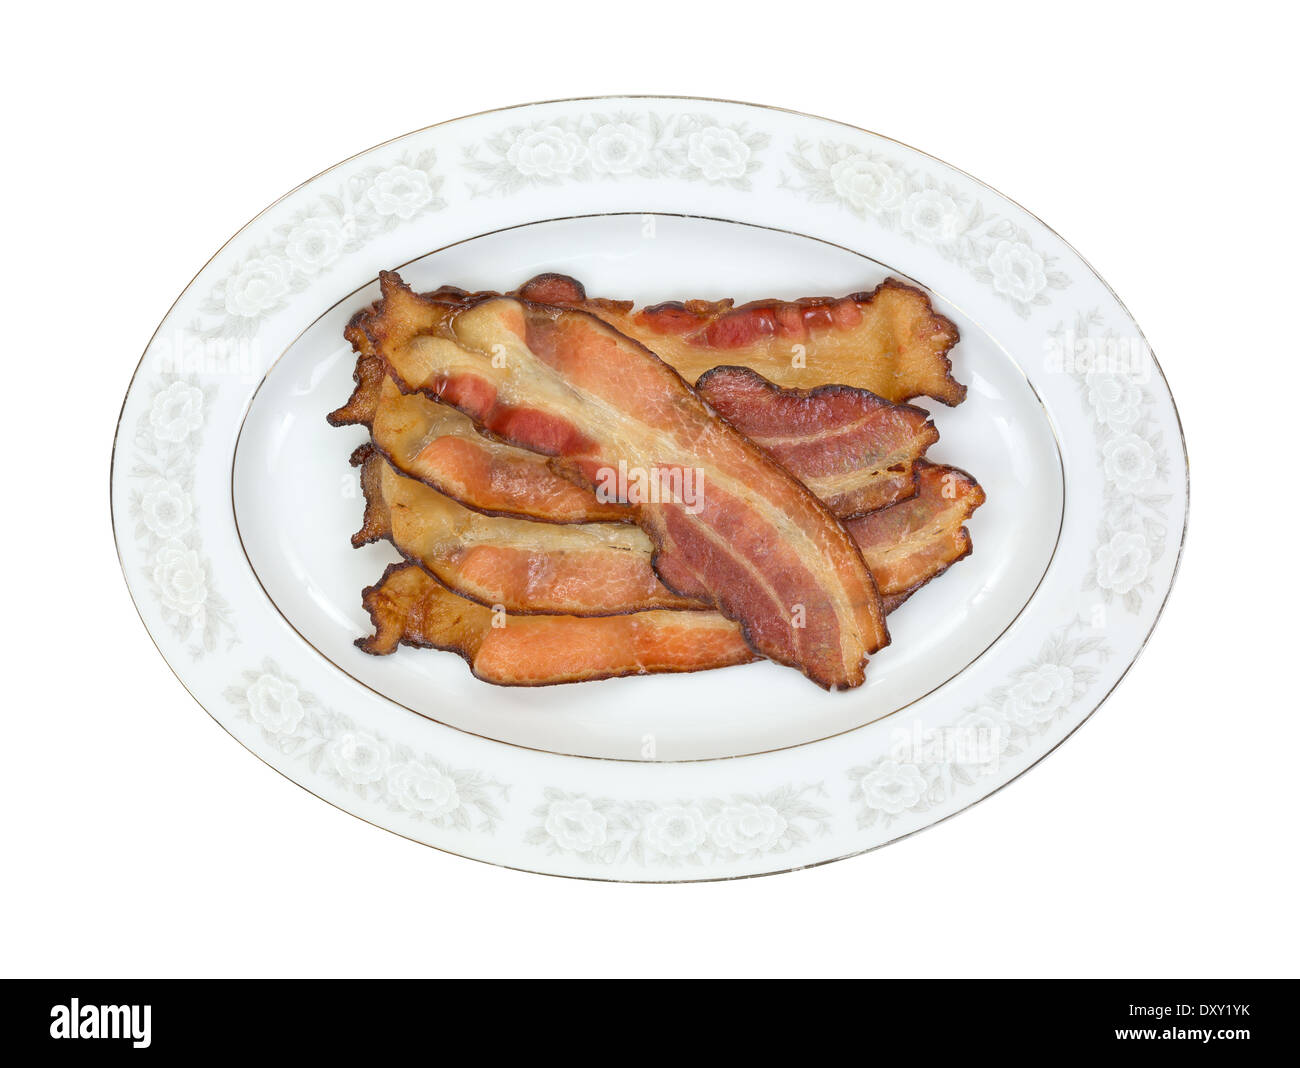 Top view of freshly cooked smoked thick sliced bacon on an old glass platter. Stock Photo